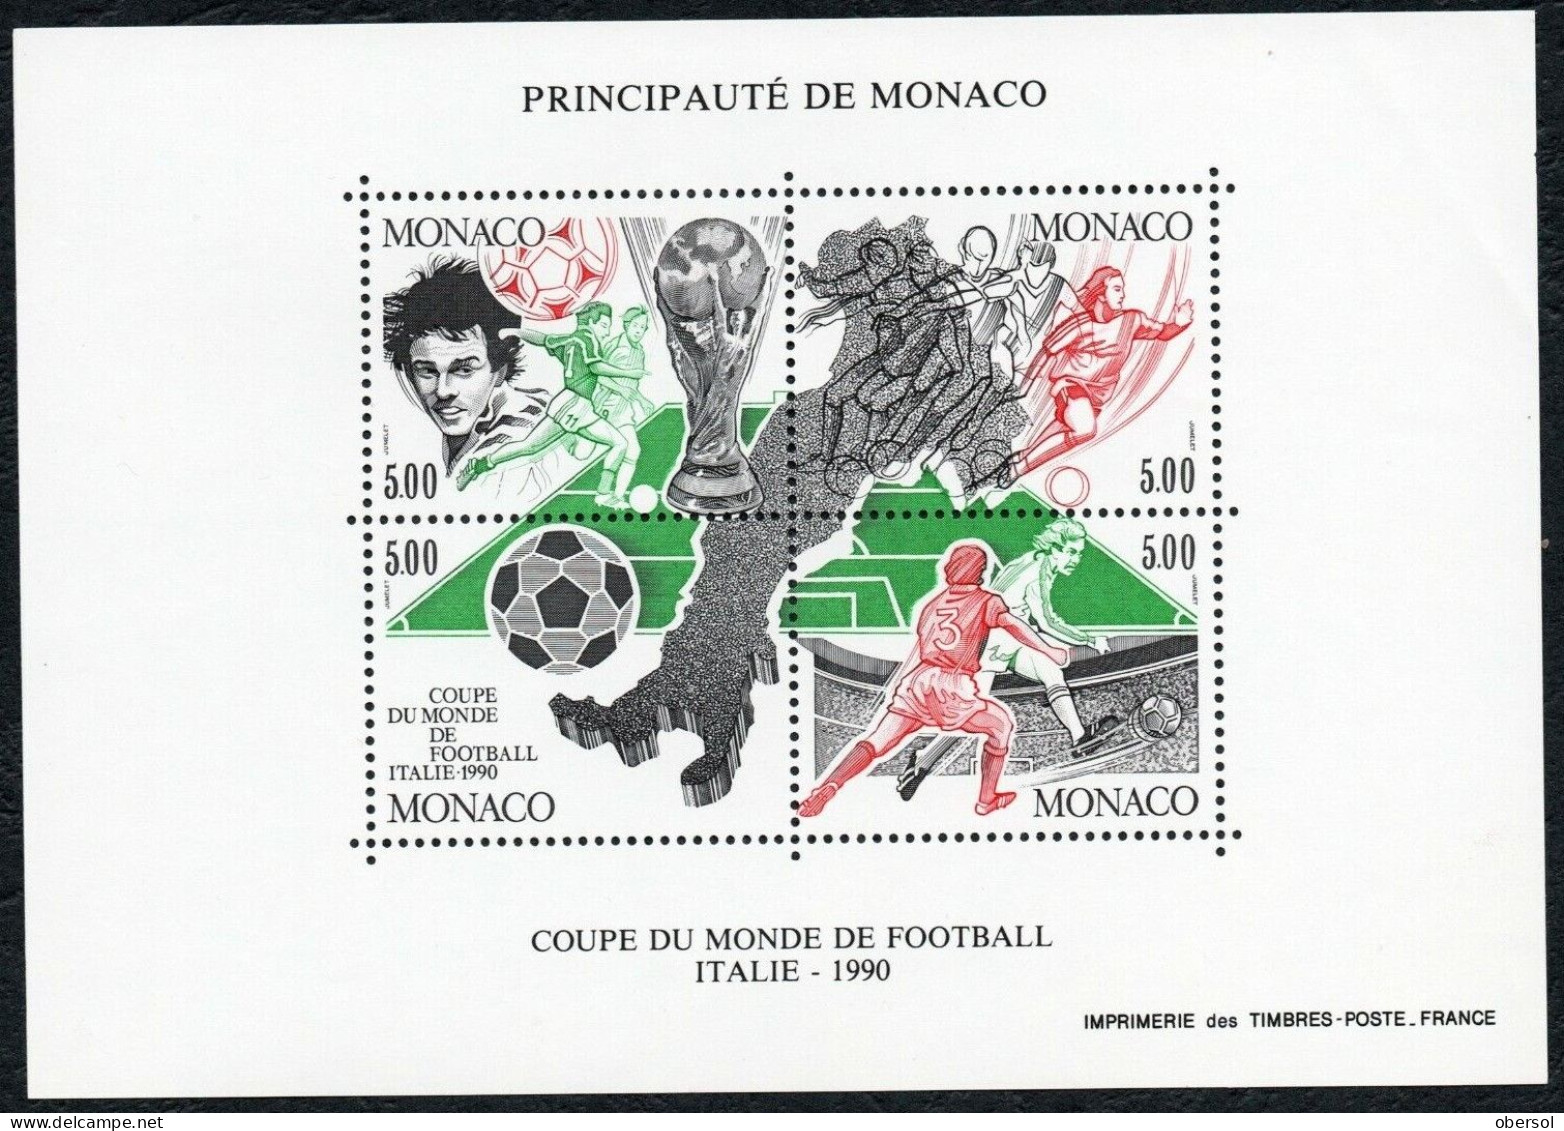 Monaco 1990 - Football World Cup Italy Sports Soccer - Sc 1718 MNH - Unused Stamps